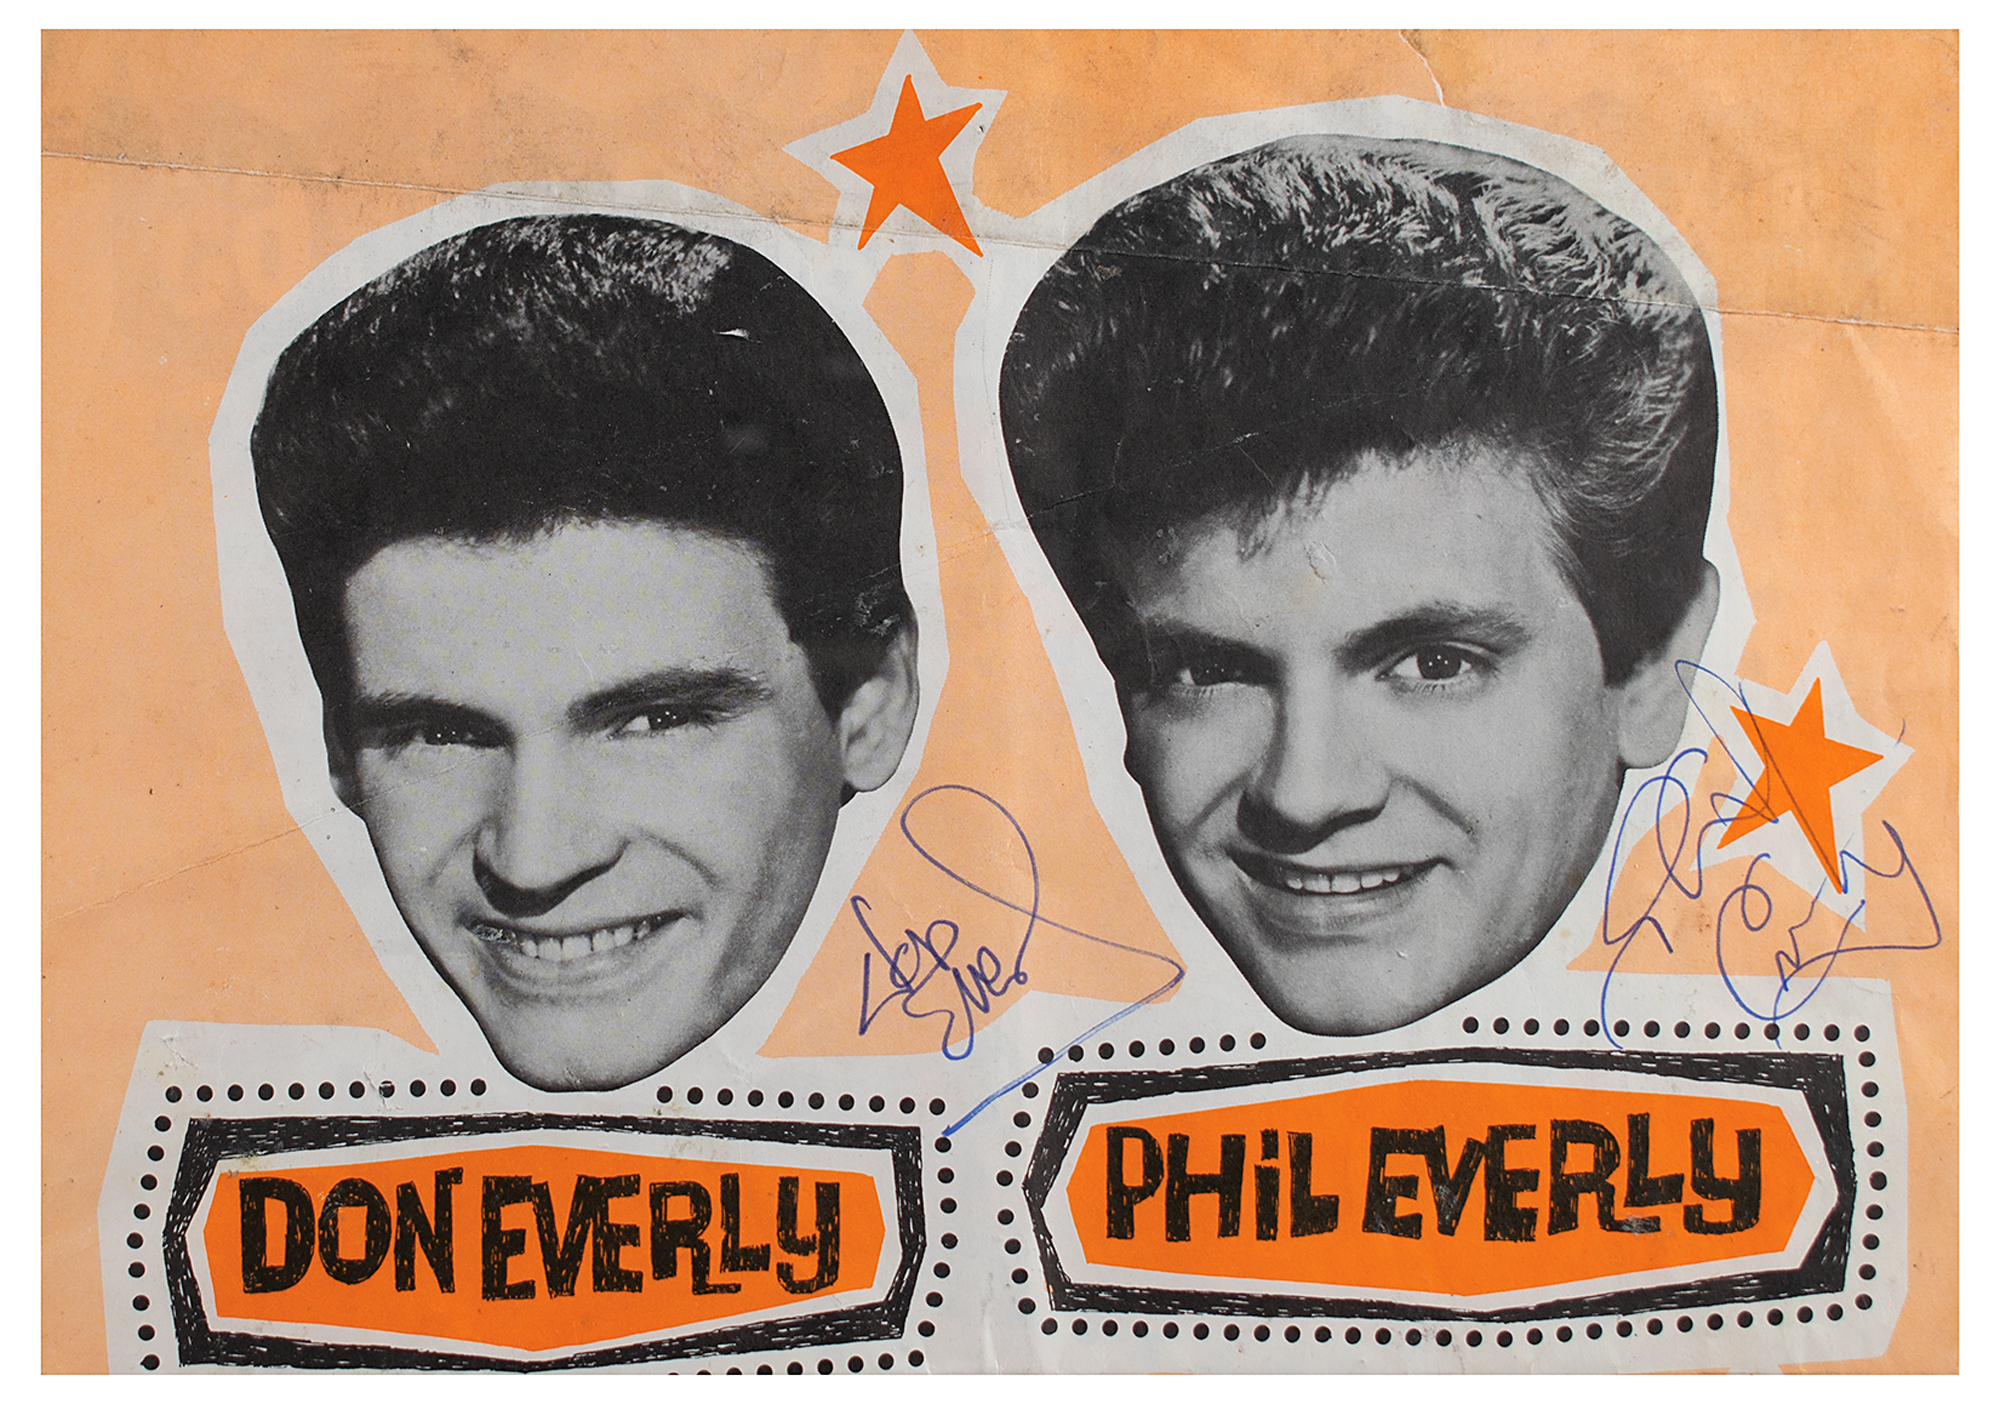 Everly Brothers Signed Souvenir Brochure | Sold for $250 | RR Auction